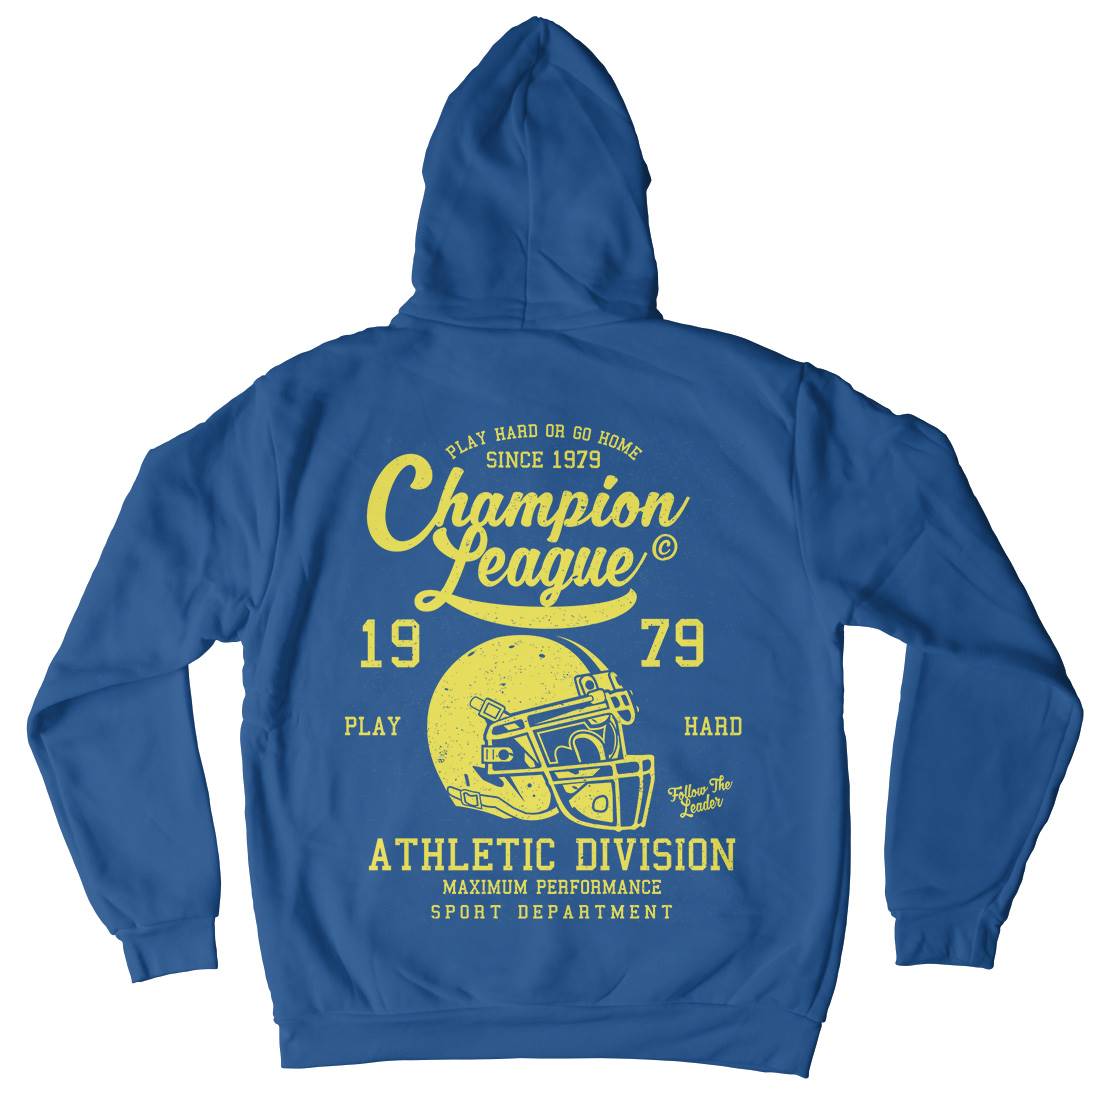 Champion League Mens Hoodie With Pocket Sport A031